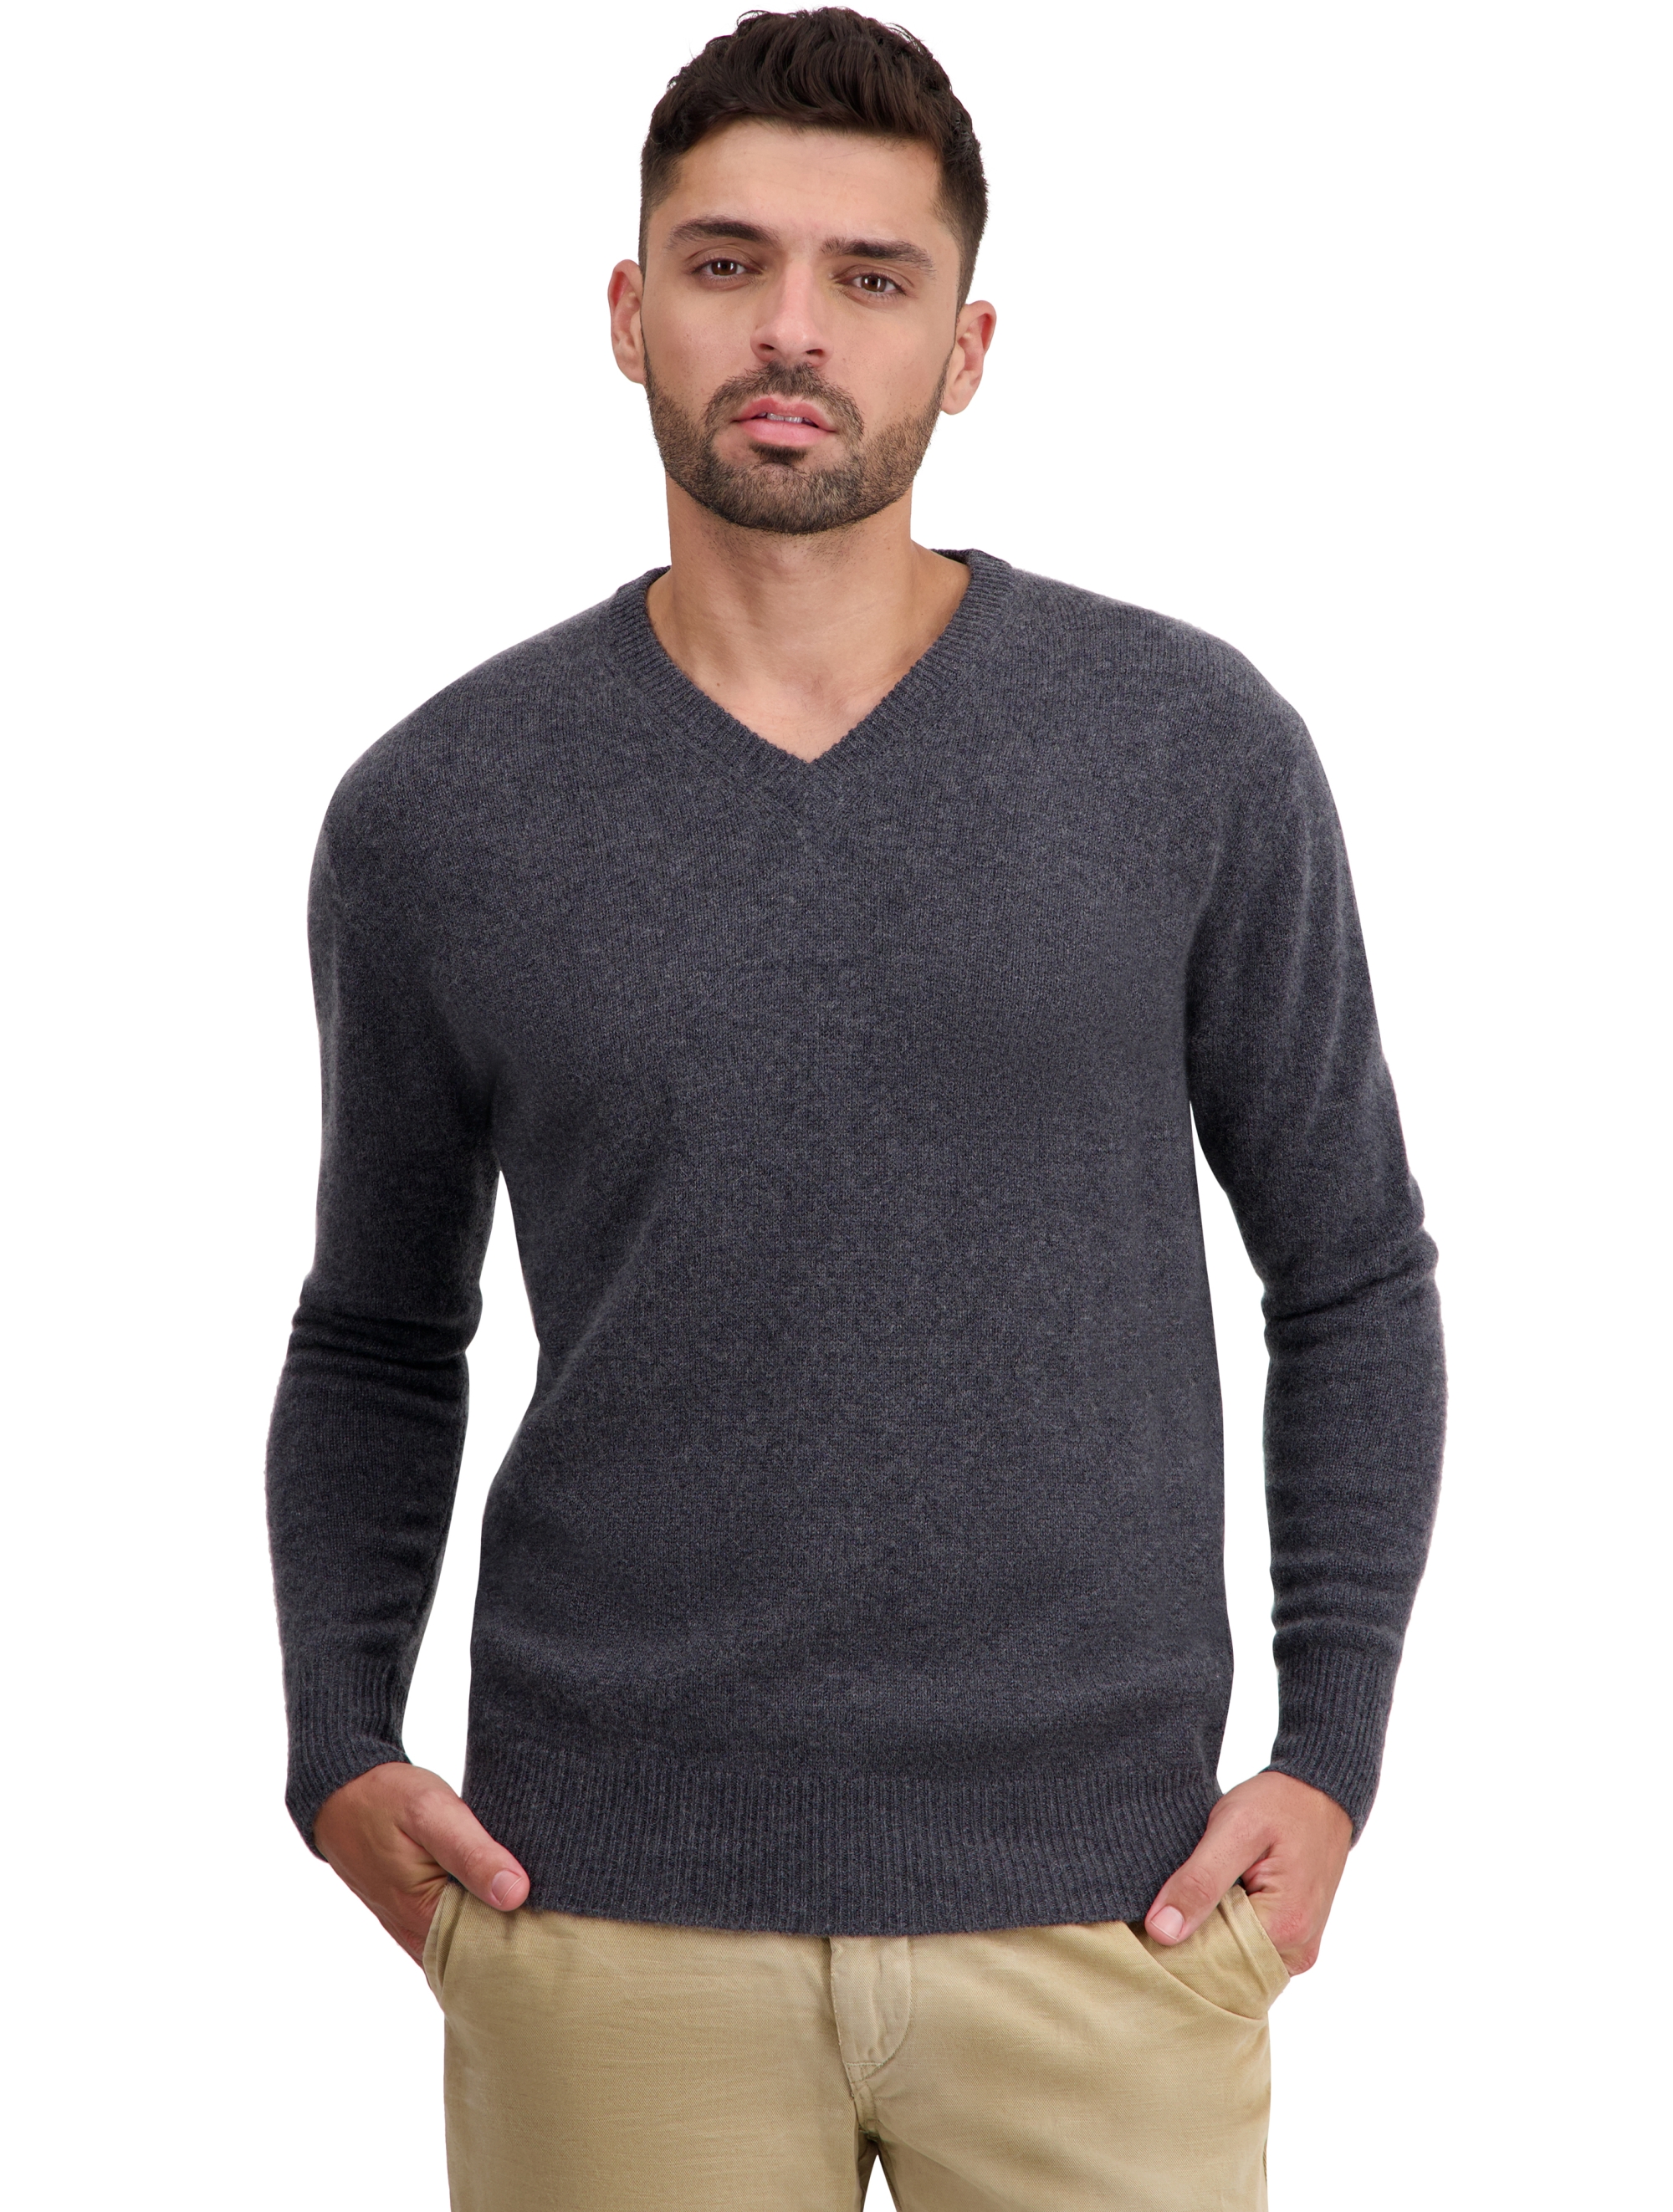 Cashmere men low prices tour first charcoal marl m